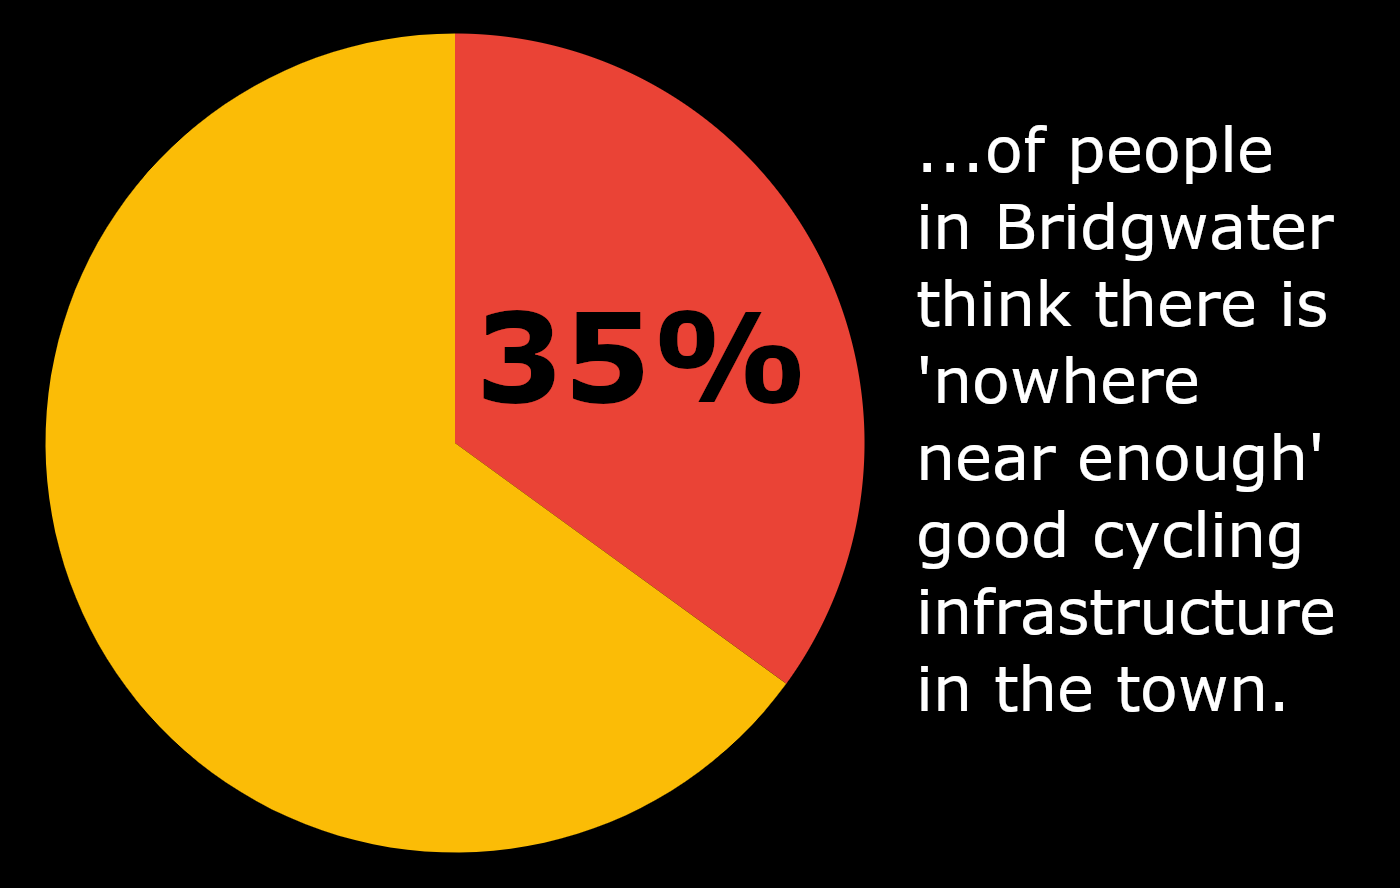 pie chart showing that 35% of survey respondents think there is 'nowhere near enough' good cycling infrastructure in Bridgwater